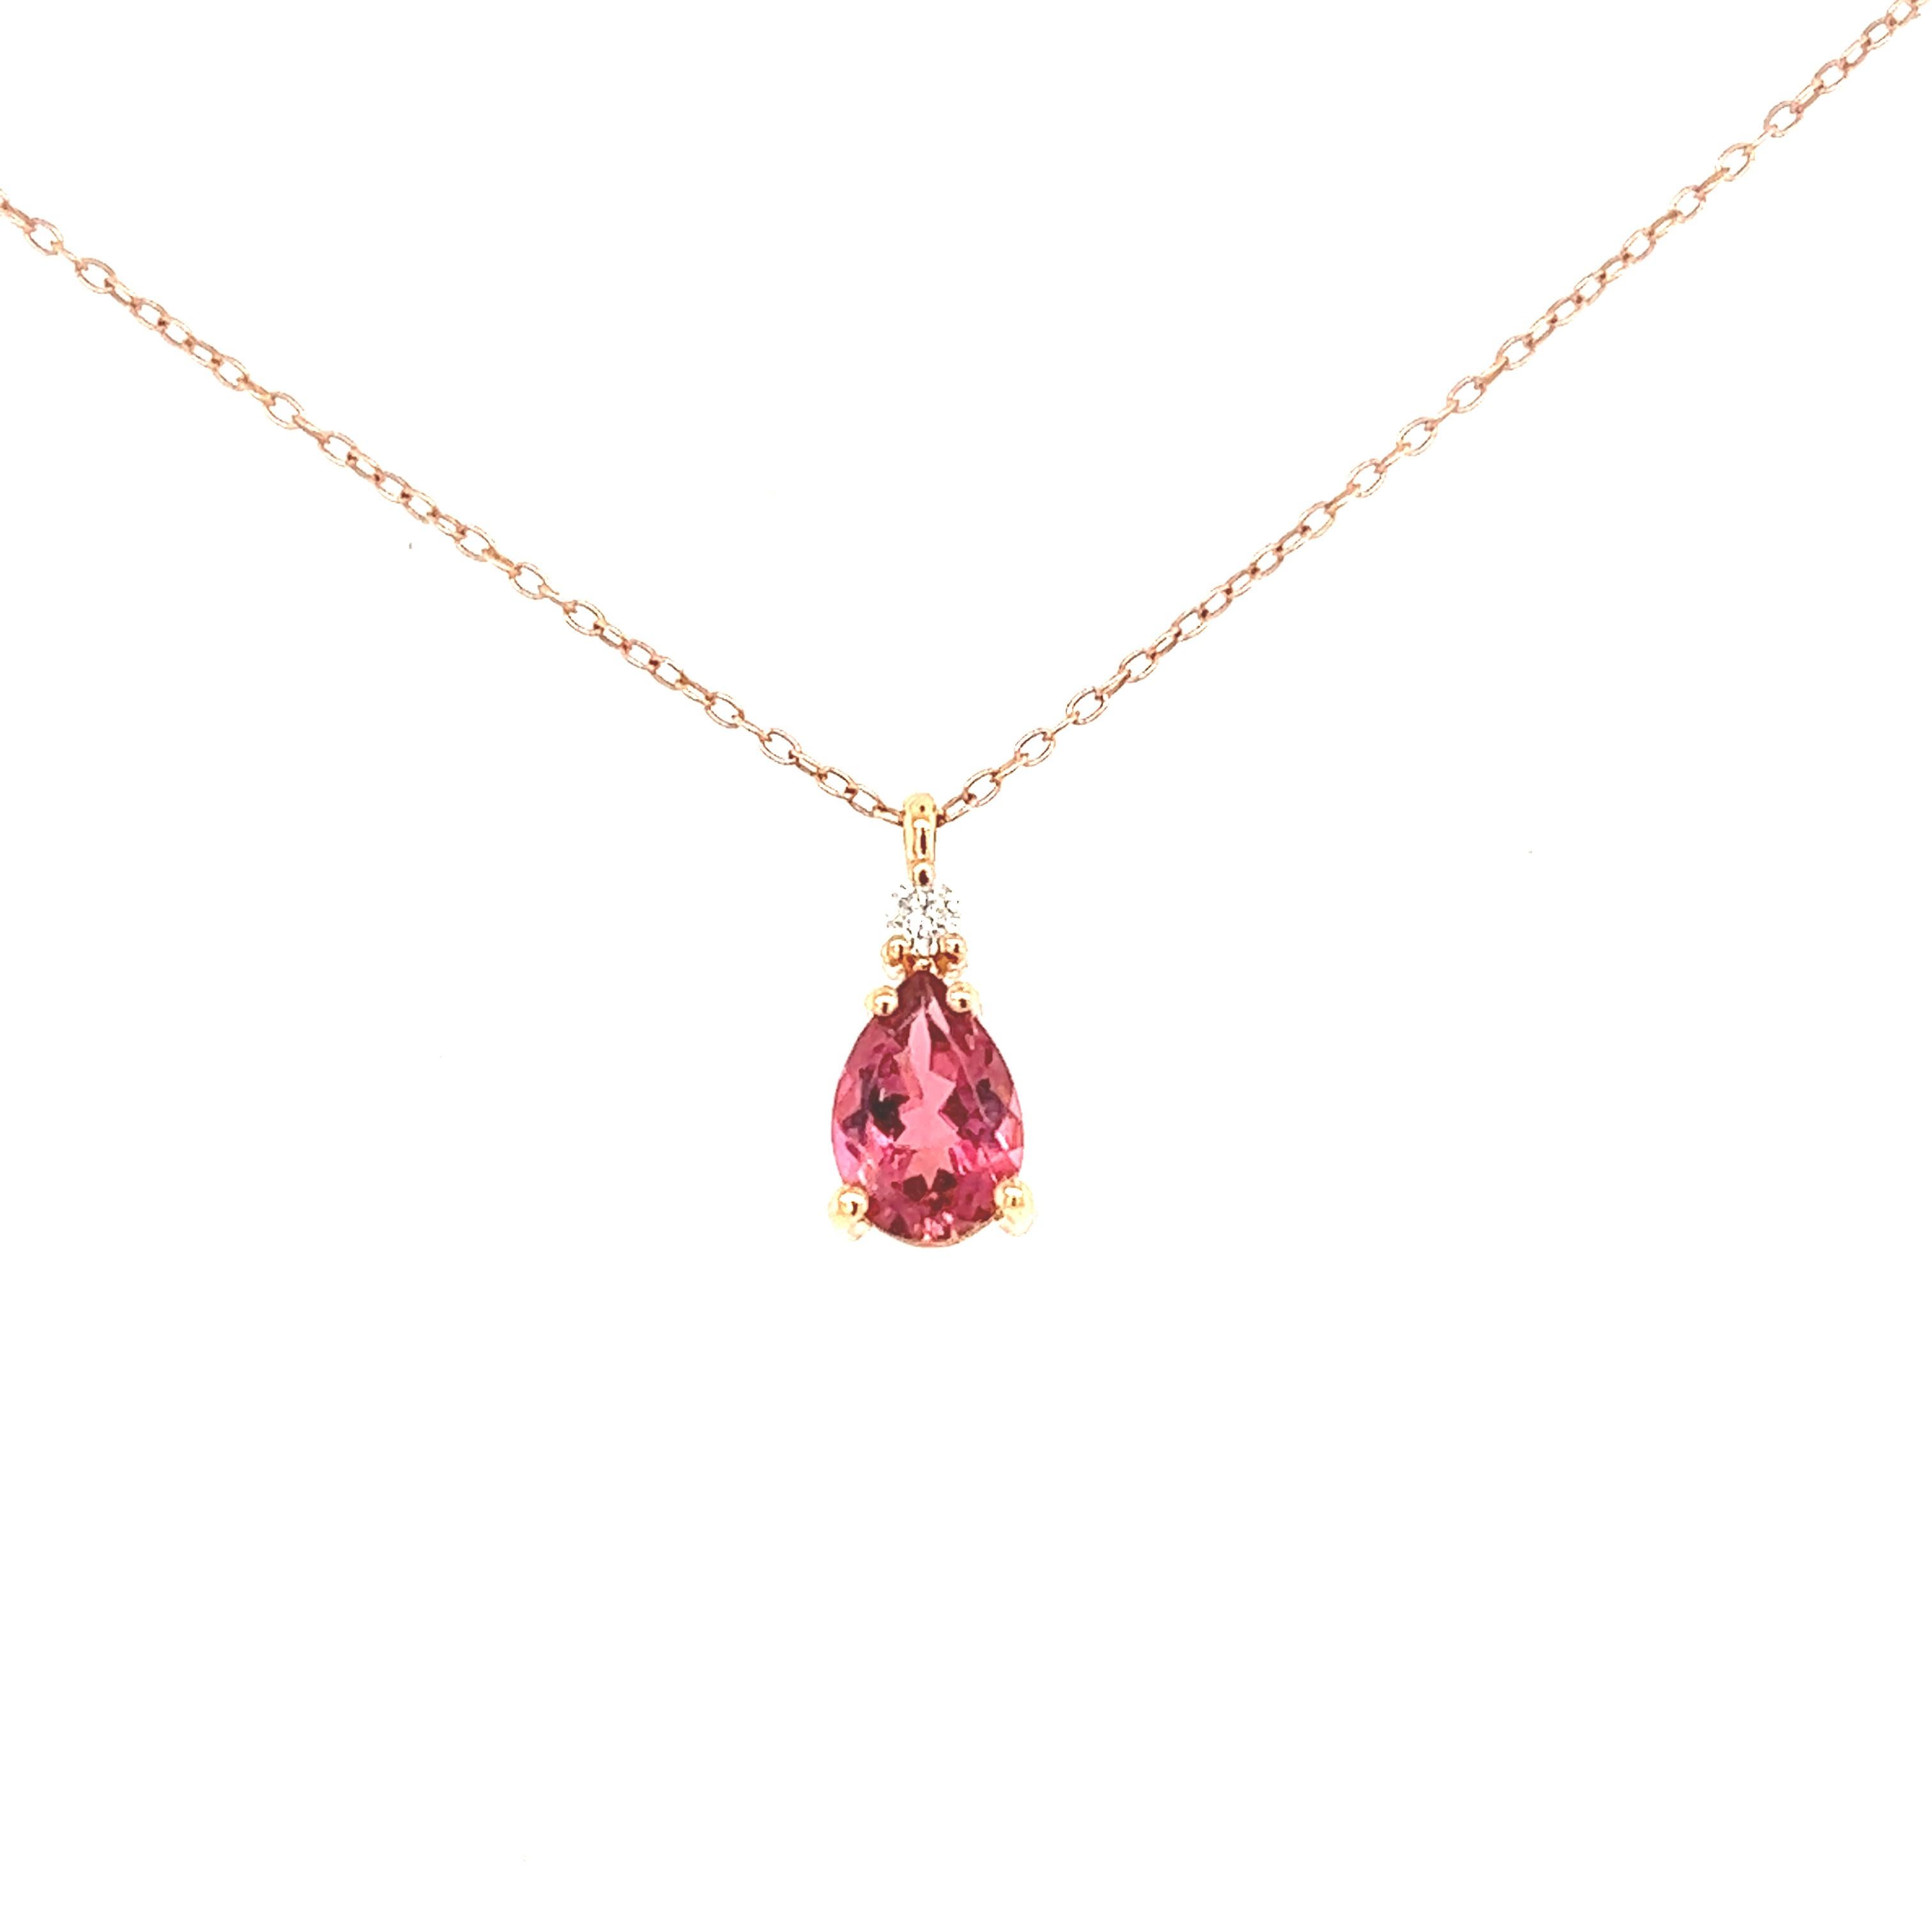 Pendant Necklace Tourmaline Diamond Rose Gold 18 Karat In New Condition For Sale In Vannes, FR